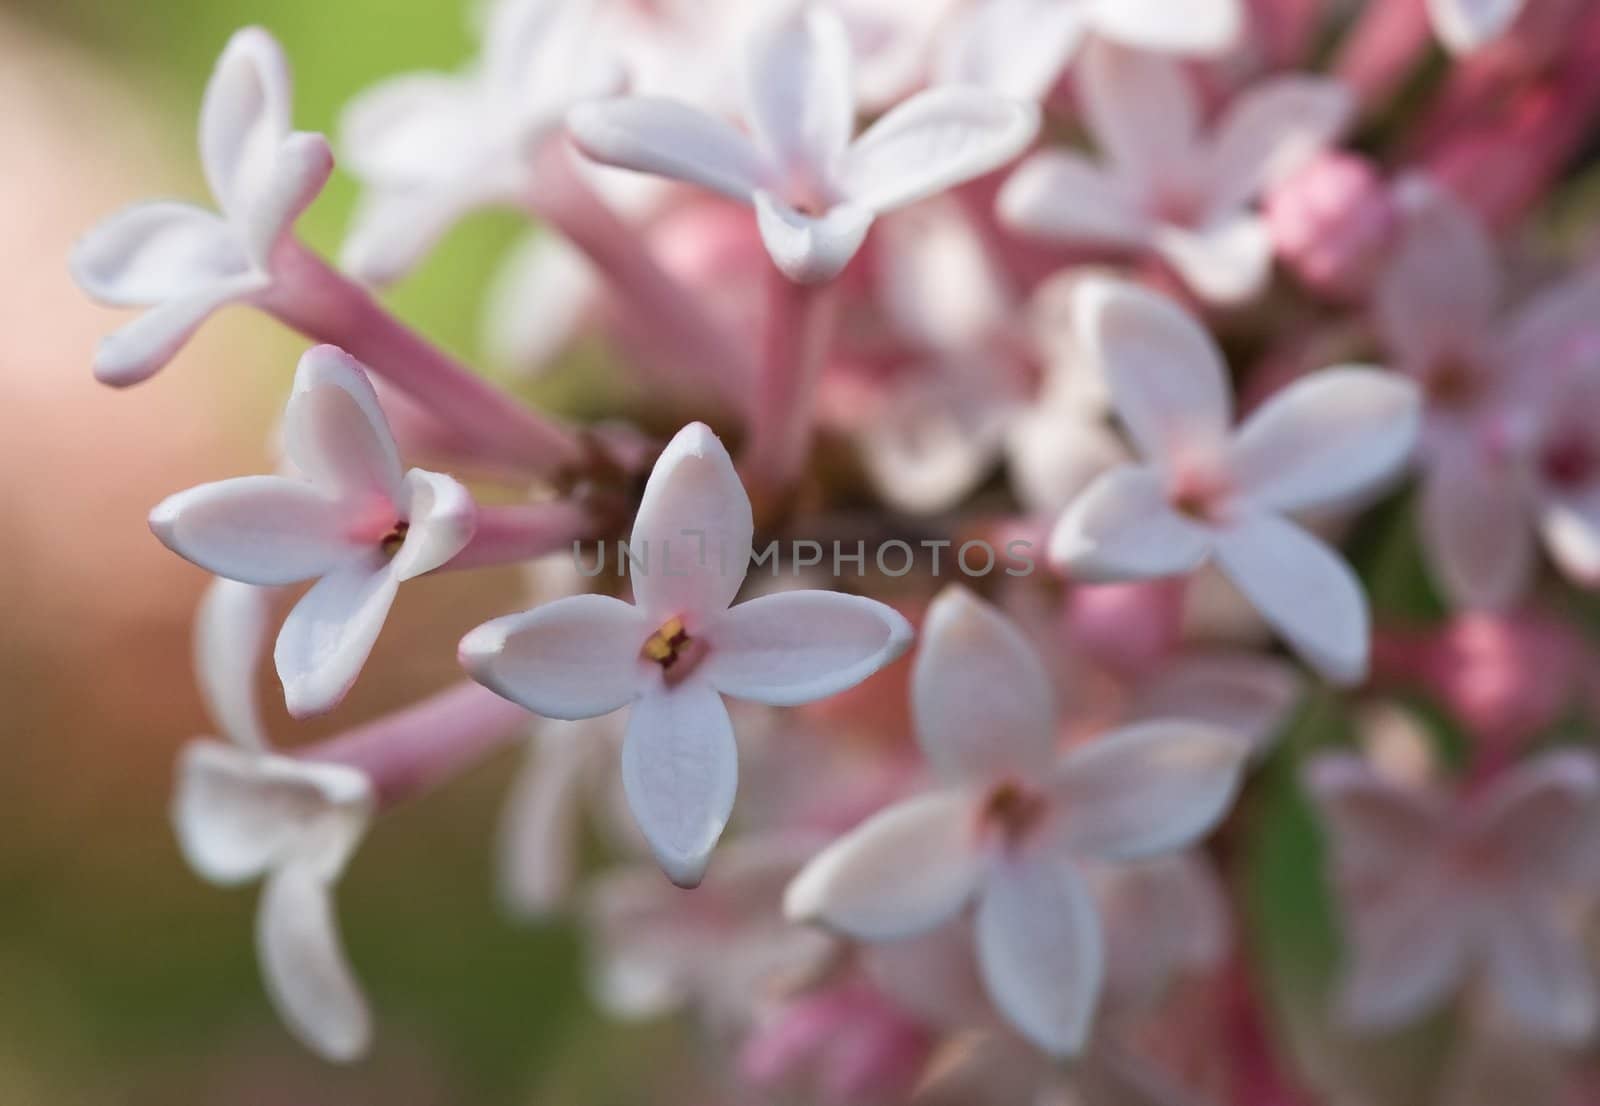 The very tiny flowers of syringa microphyla in close view